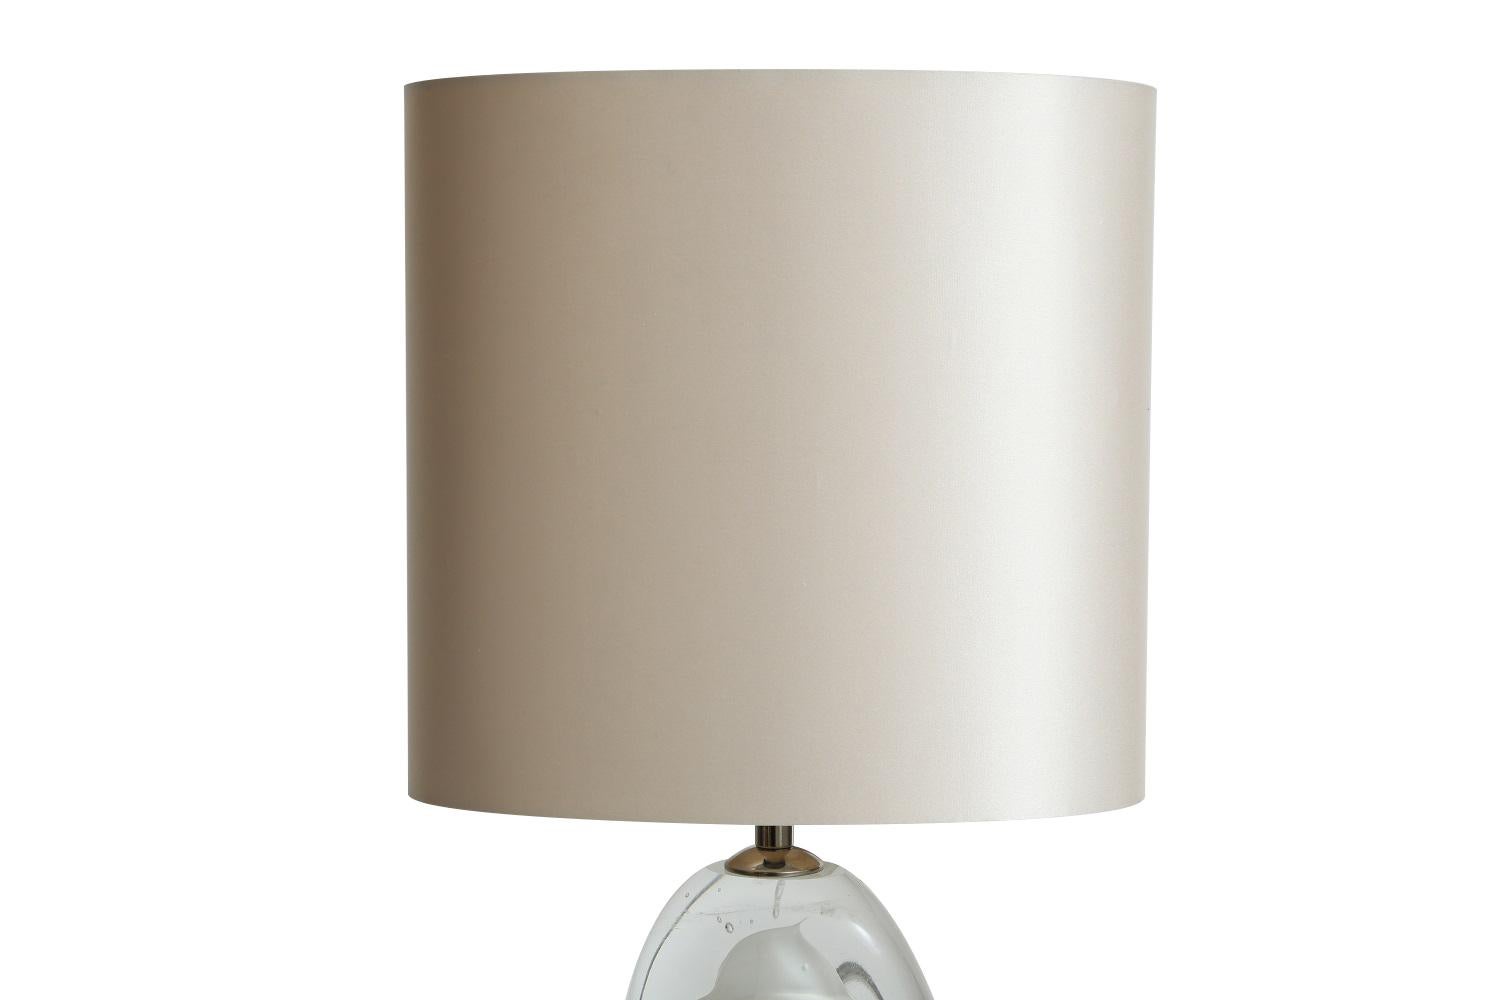 Perfume bottle table lamp in white by Porta Romana.
Dimensions:
20.25